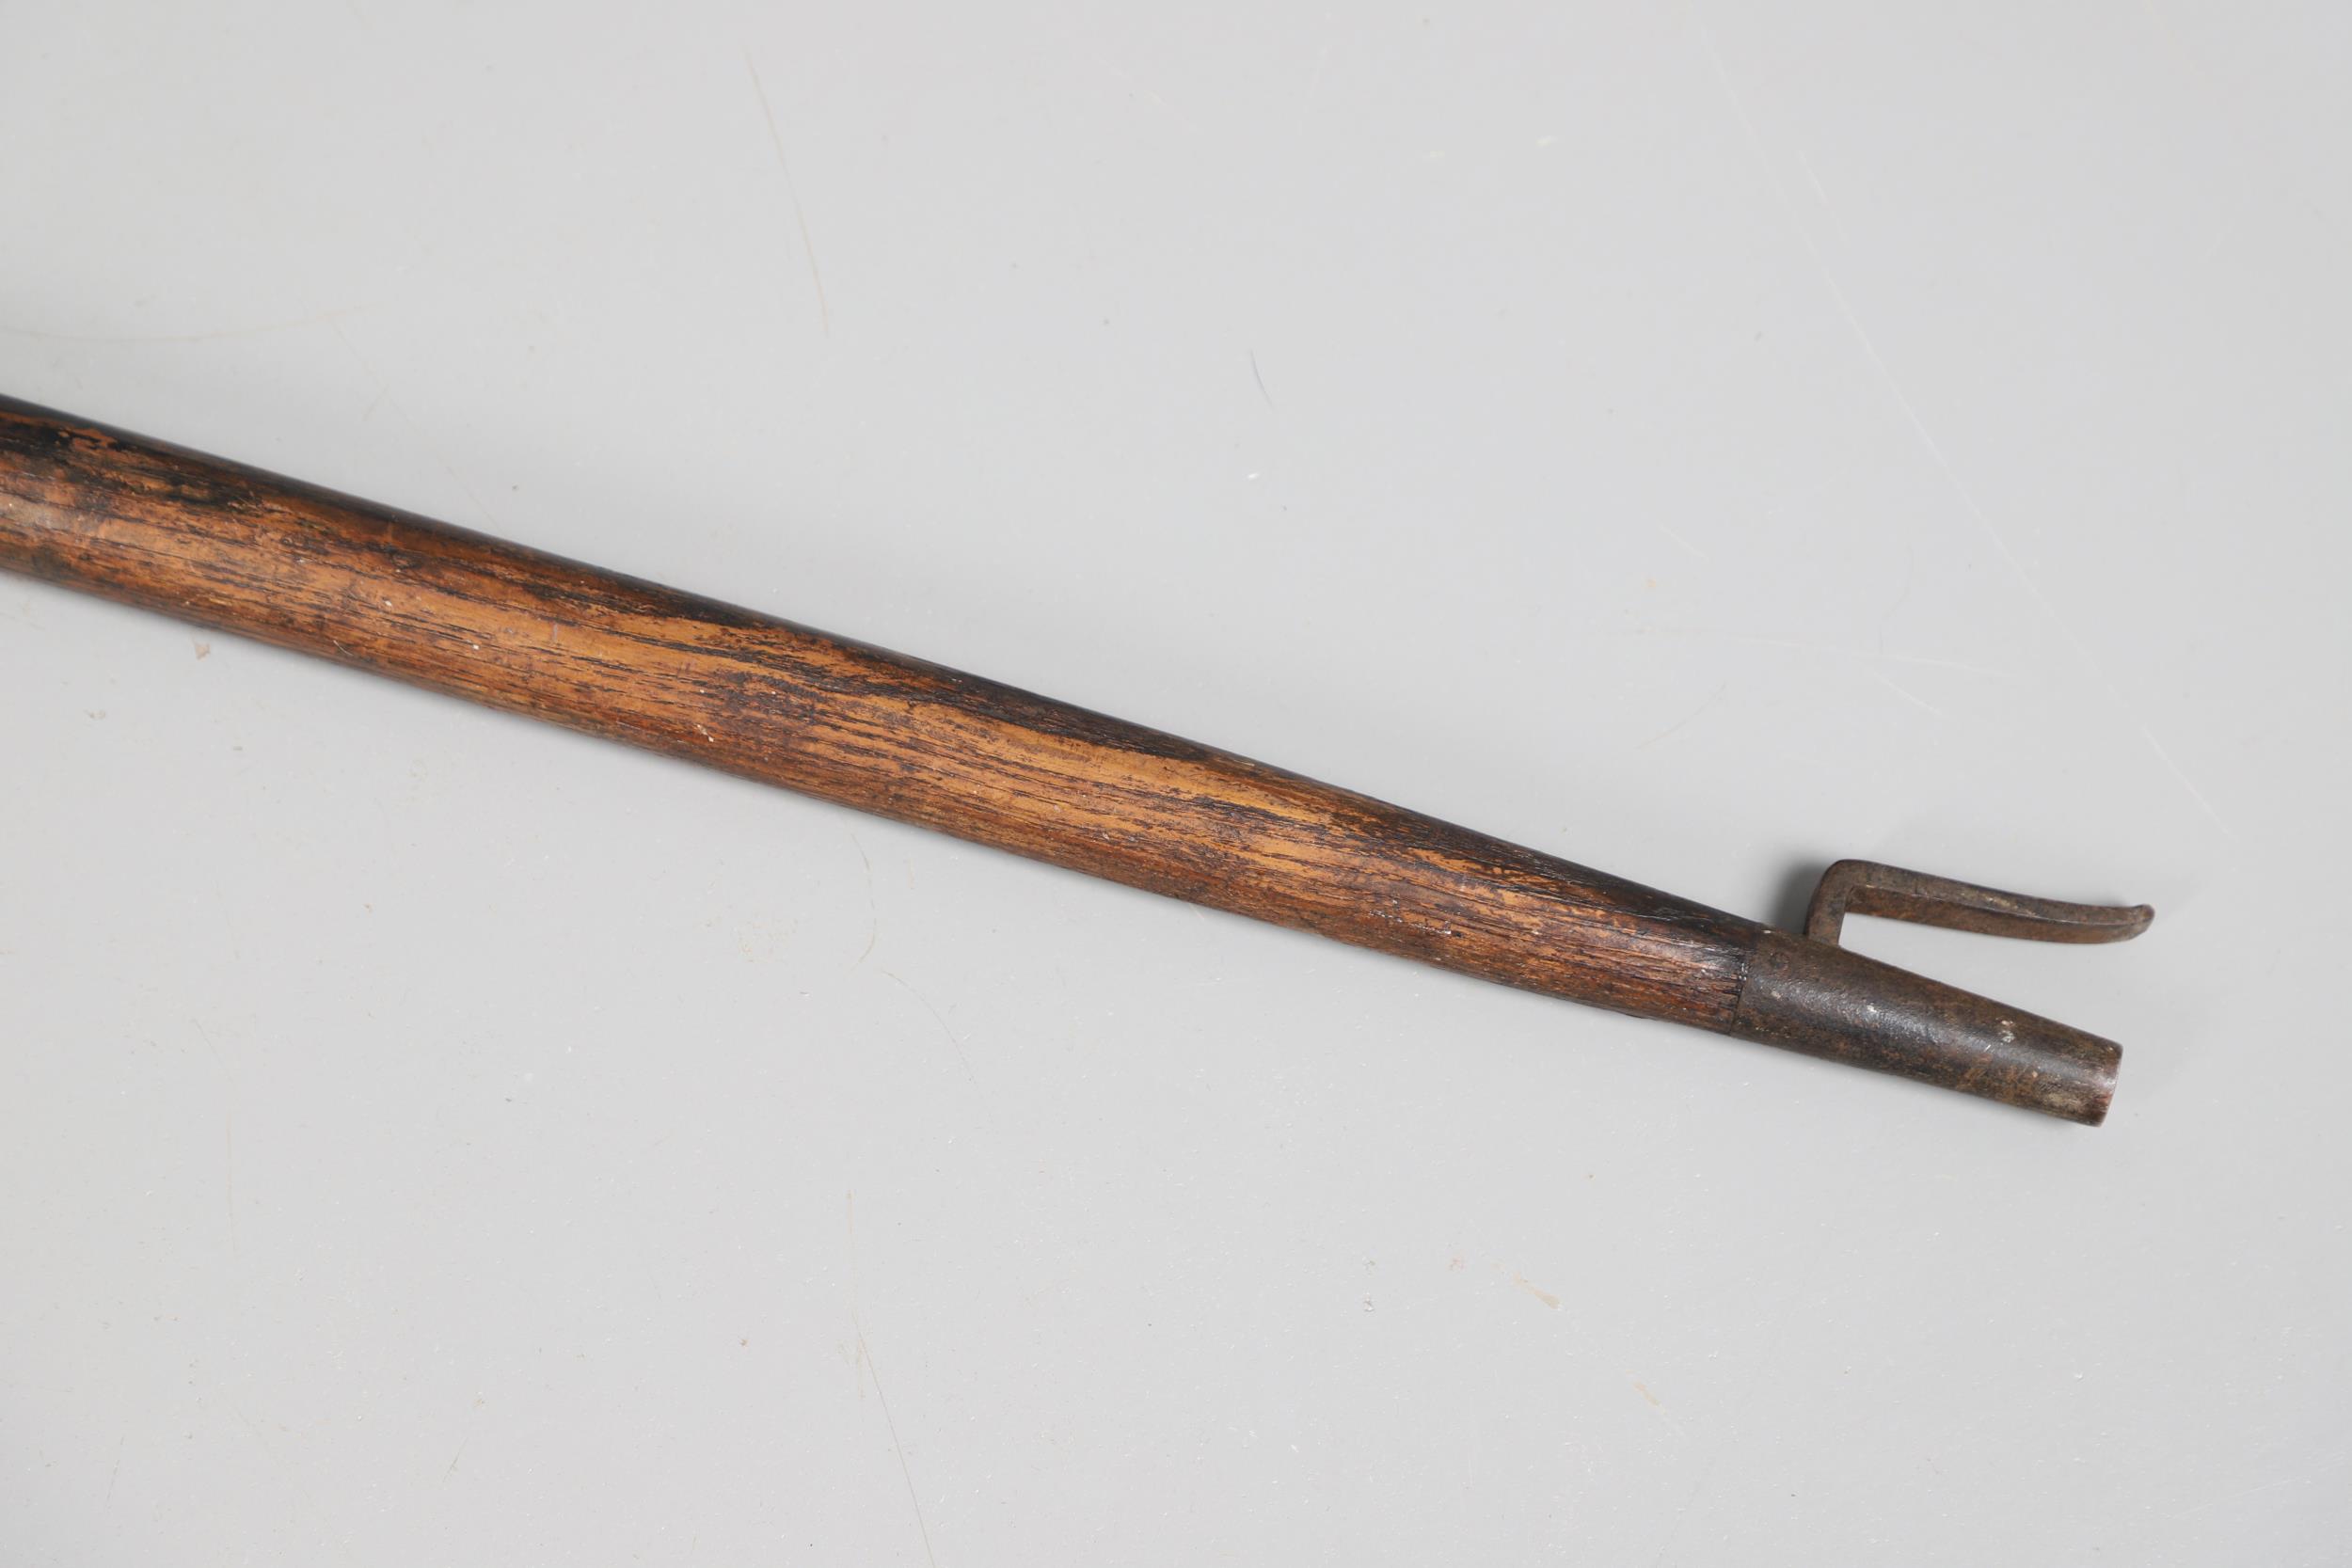 A SUBSTANTIAL PERSIAN OR OTTOMAN TWO HANDLED AXE. - Image 8 of 11